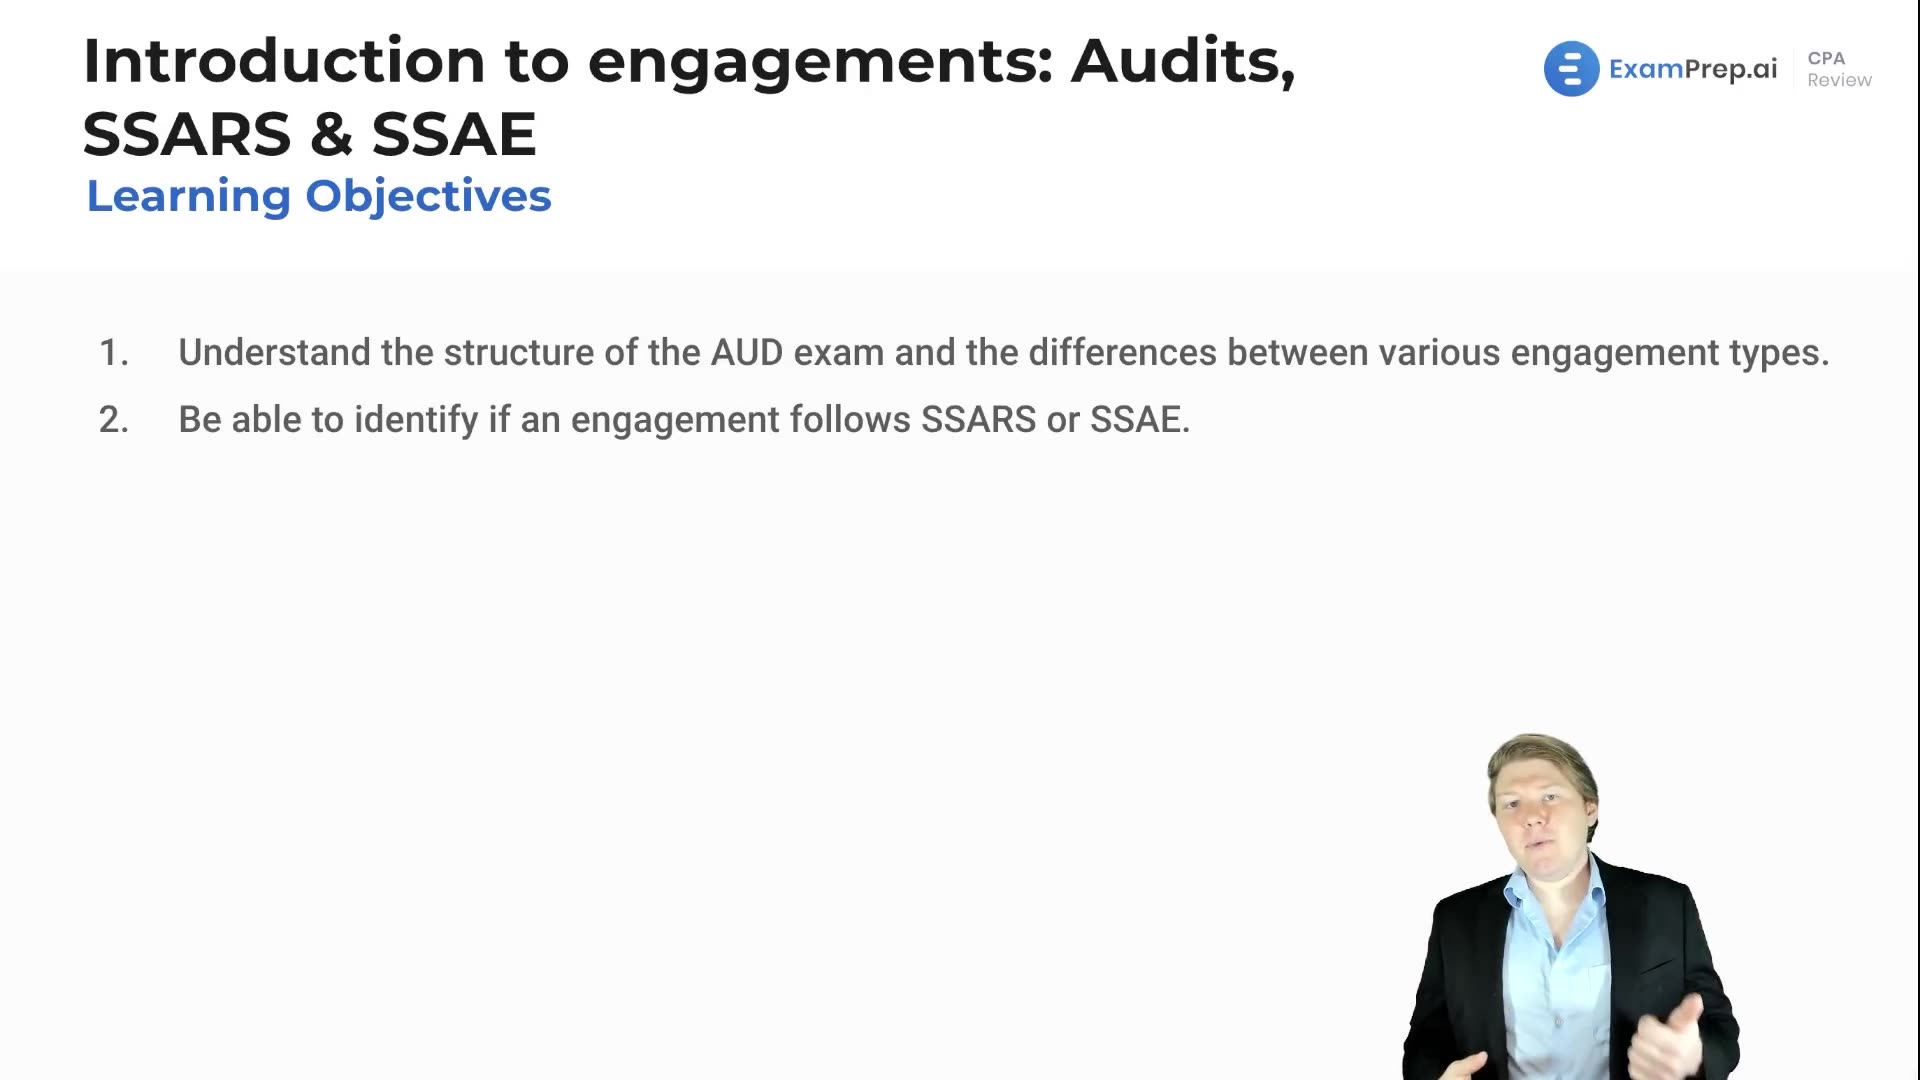 Introduction to Engagements: Audits, SSARS & SSAE Objectives lesson thumbnail